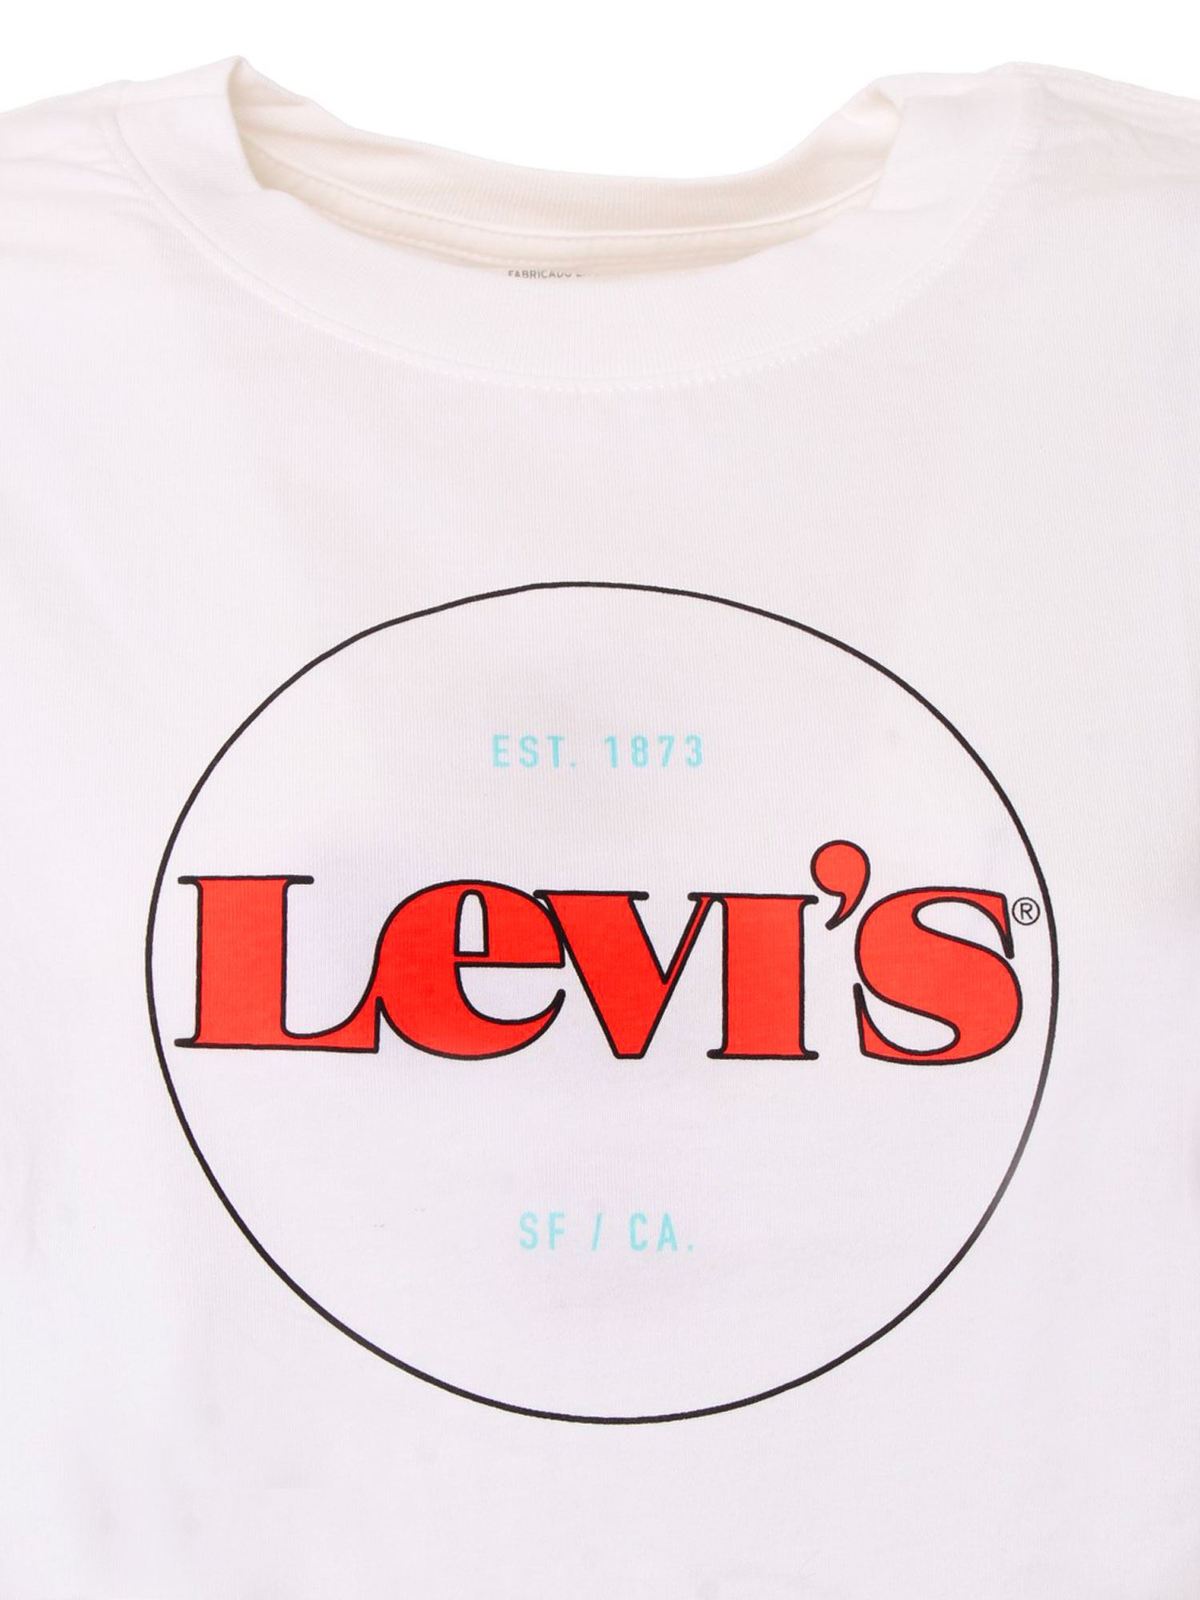 white levi shirt with red logo